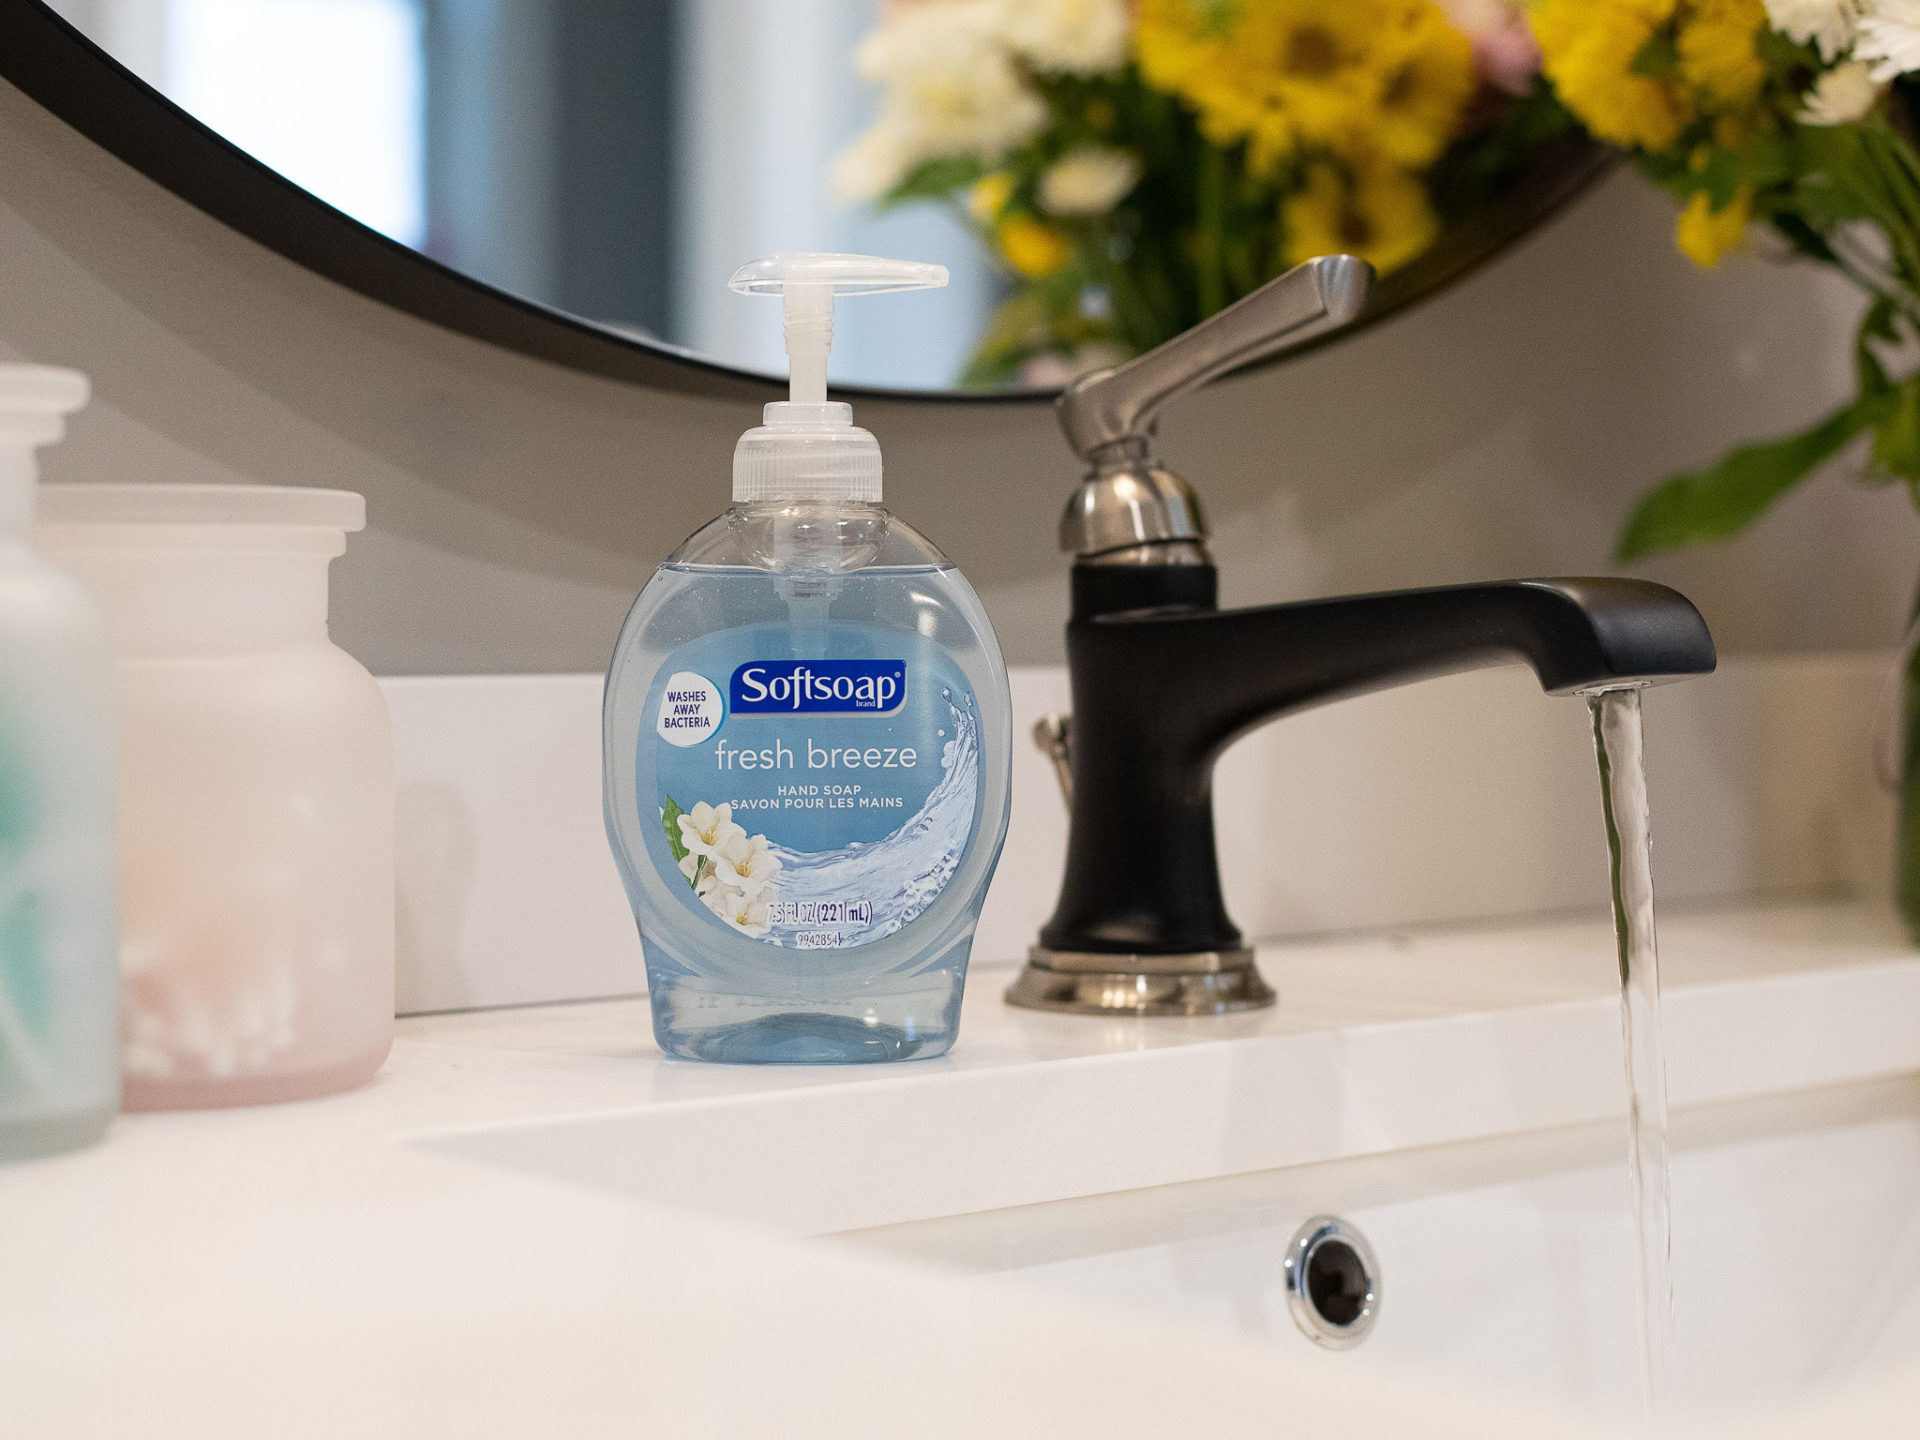 Softsoap Liquid Hand Soap Is Just 99¢ Per Bottle At Kroger